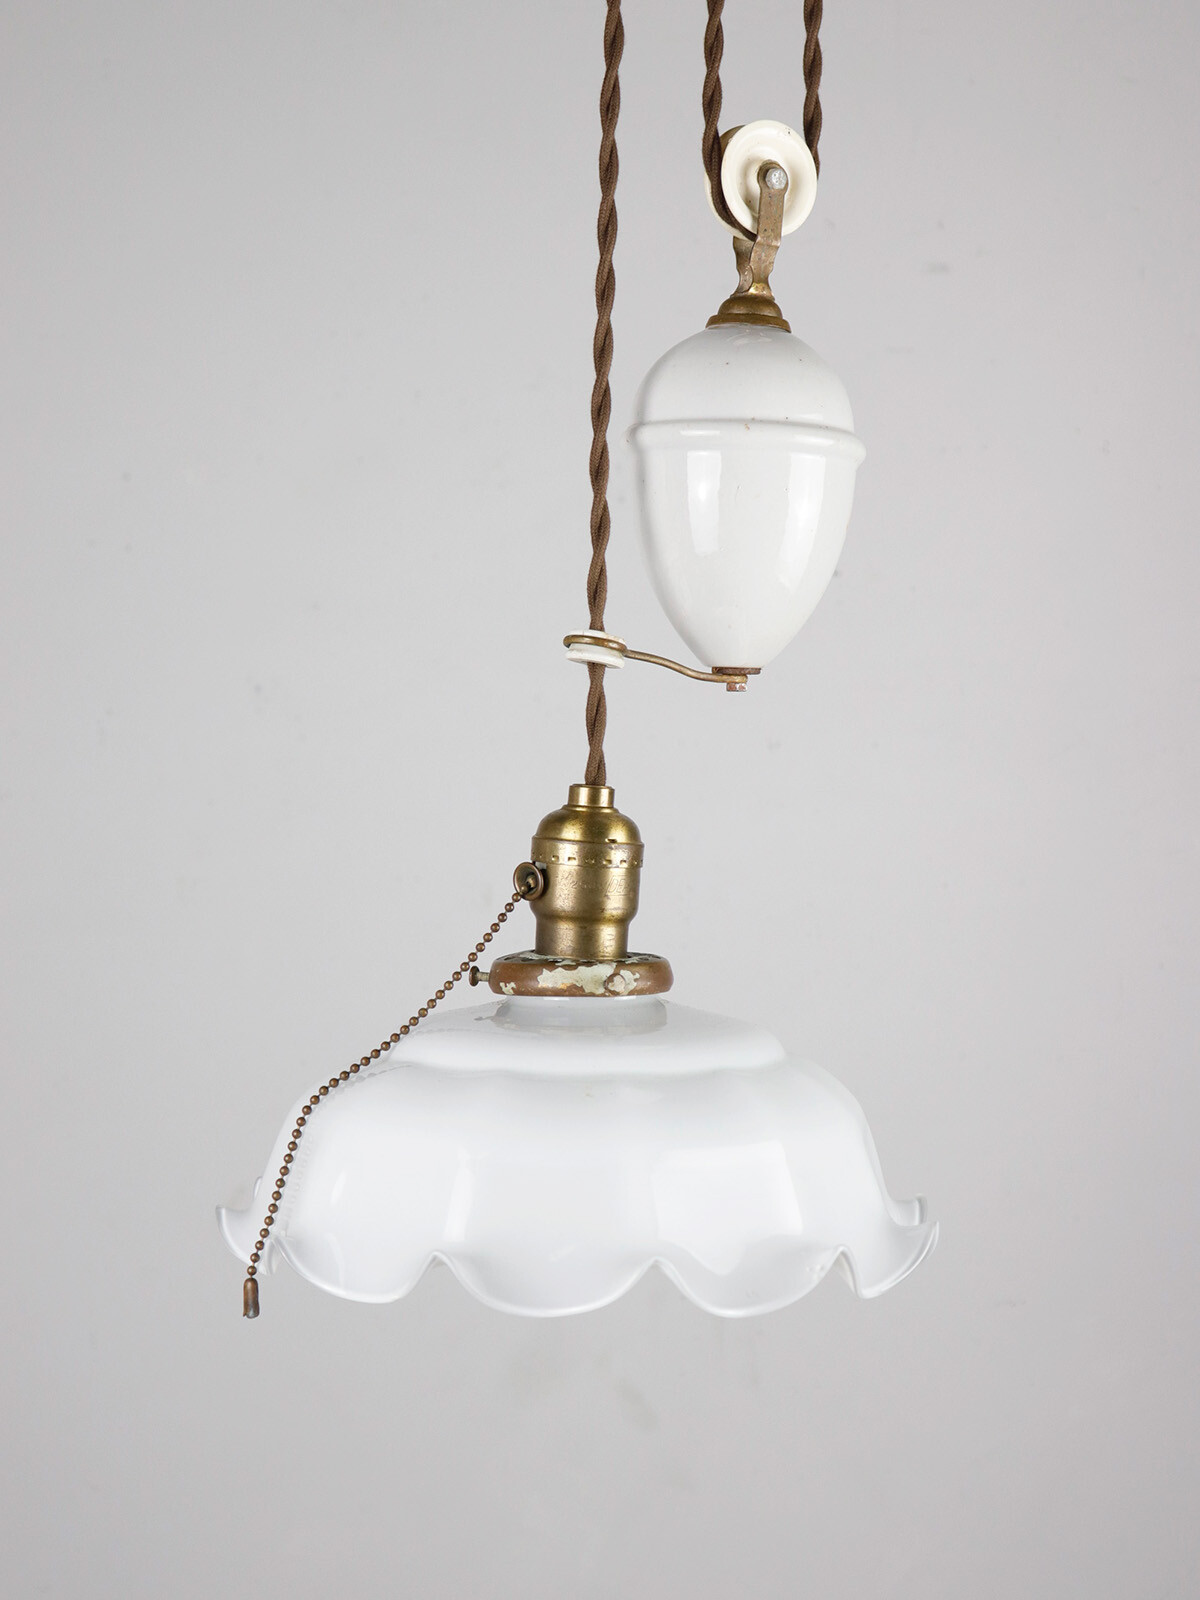 rise and fall pendant light, vintage,france,glass lamp